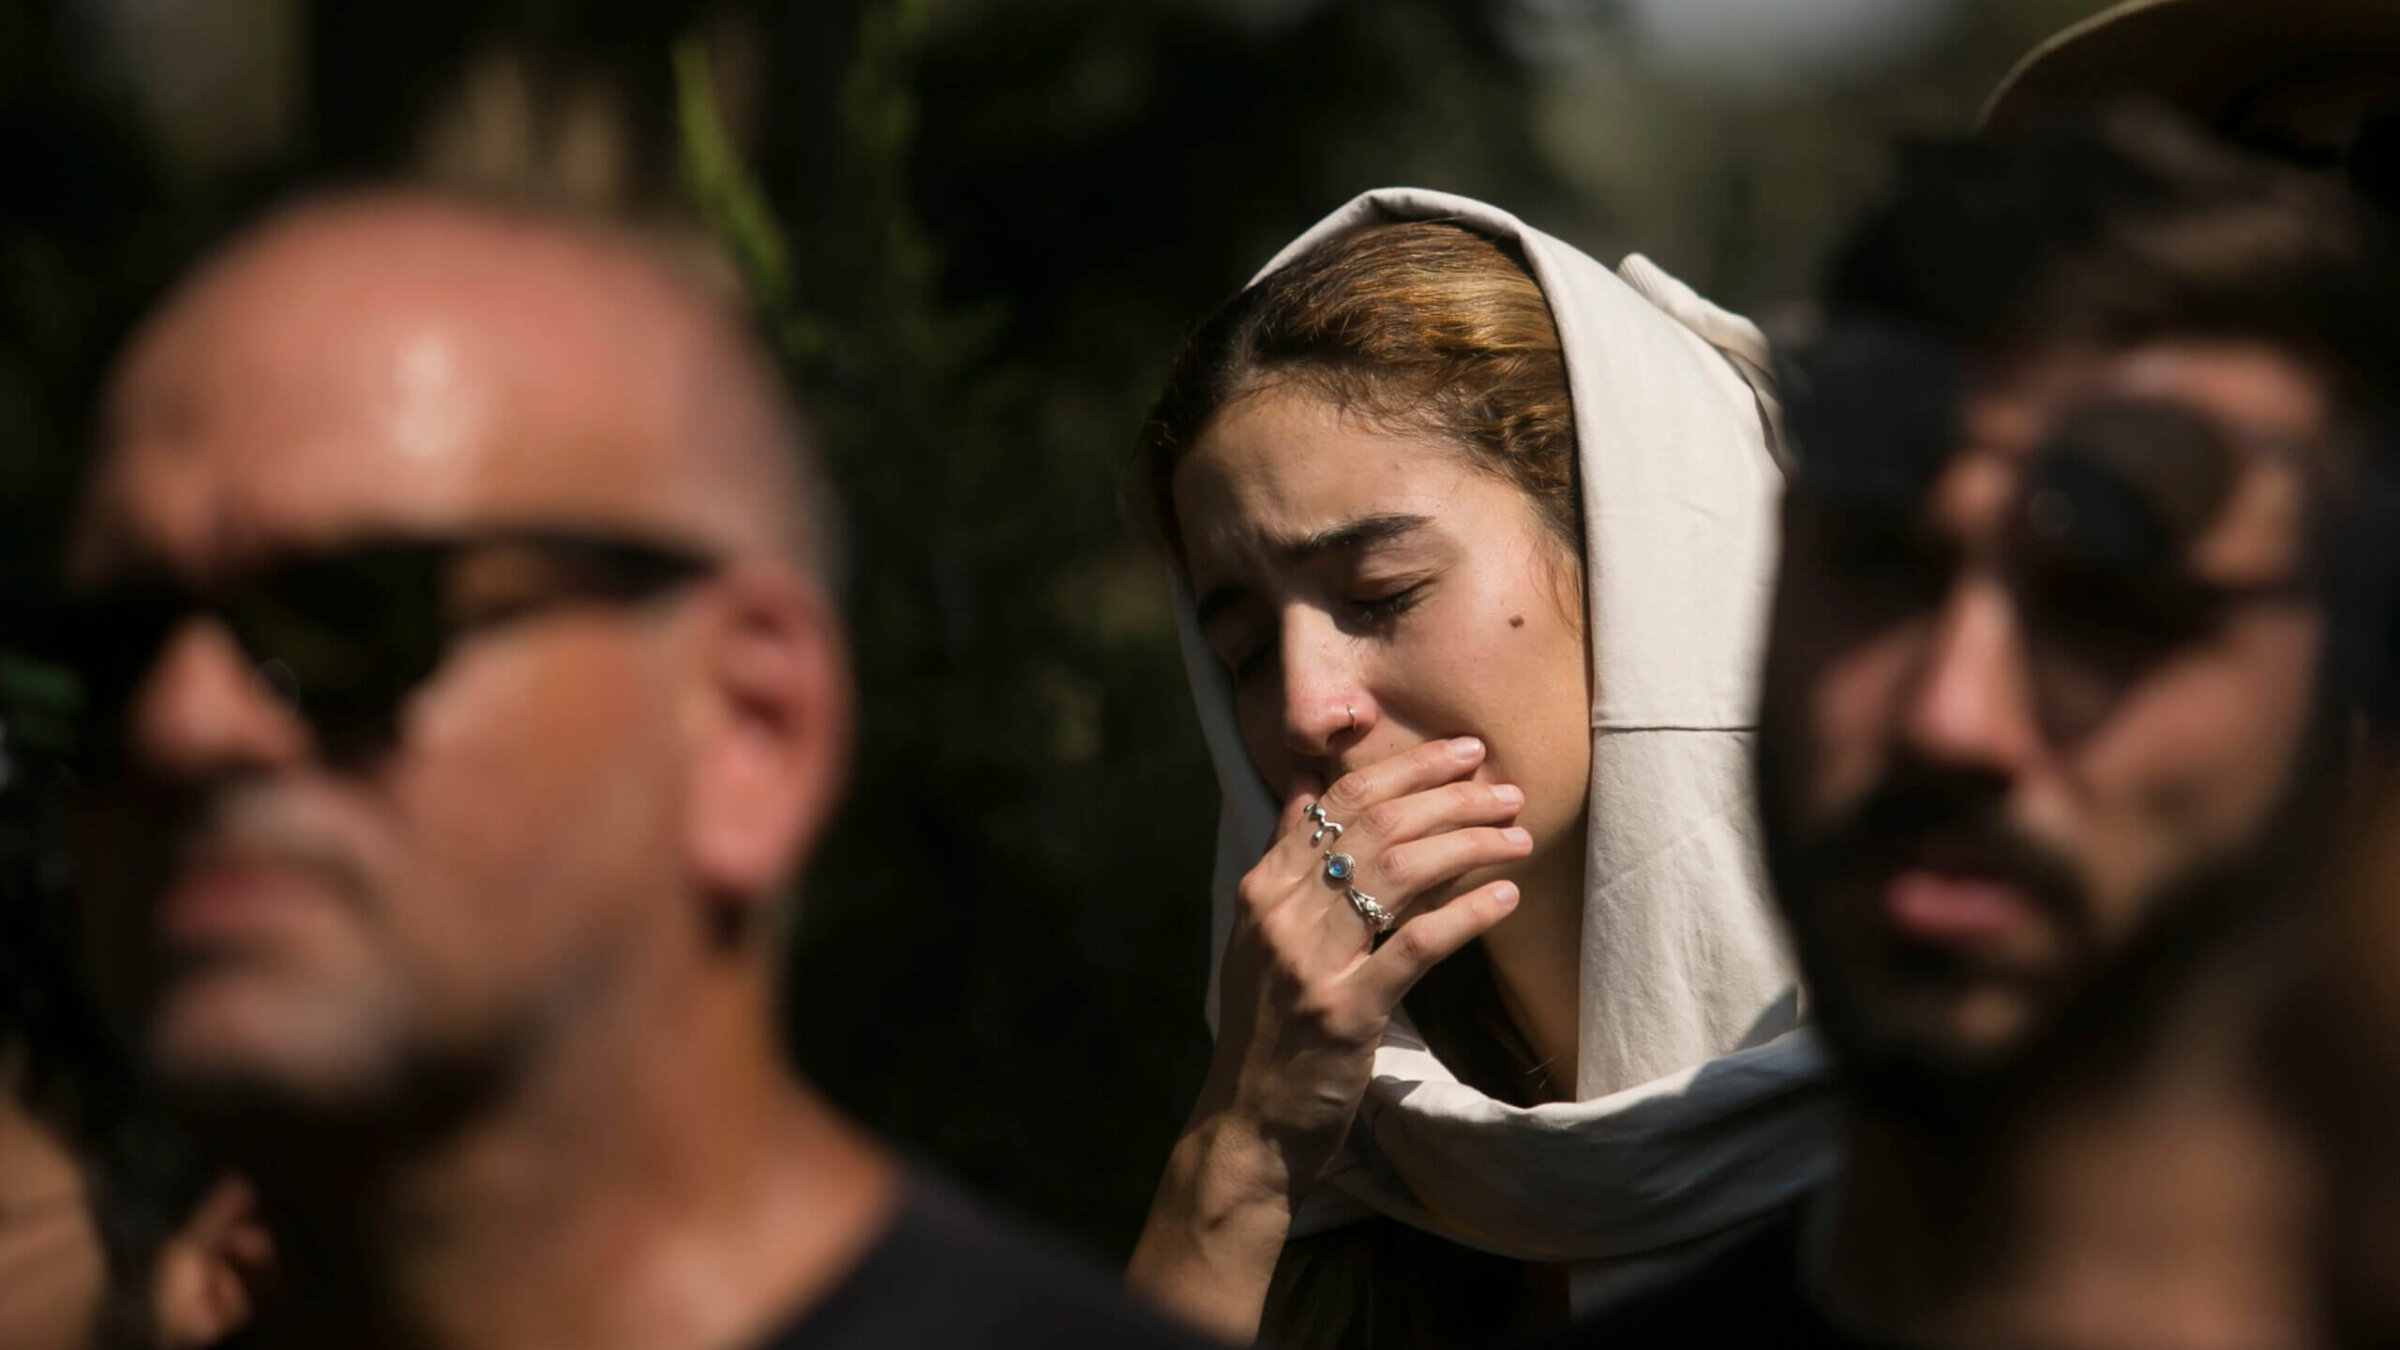 Family and friends of May Naim, 24, who was murdered by Hamas militants at a music festival near the Israeli border with Gaza, react during her funeral on Wednesday in Gan Haim, Israel.  